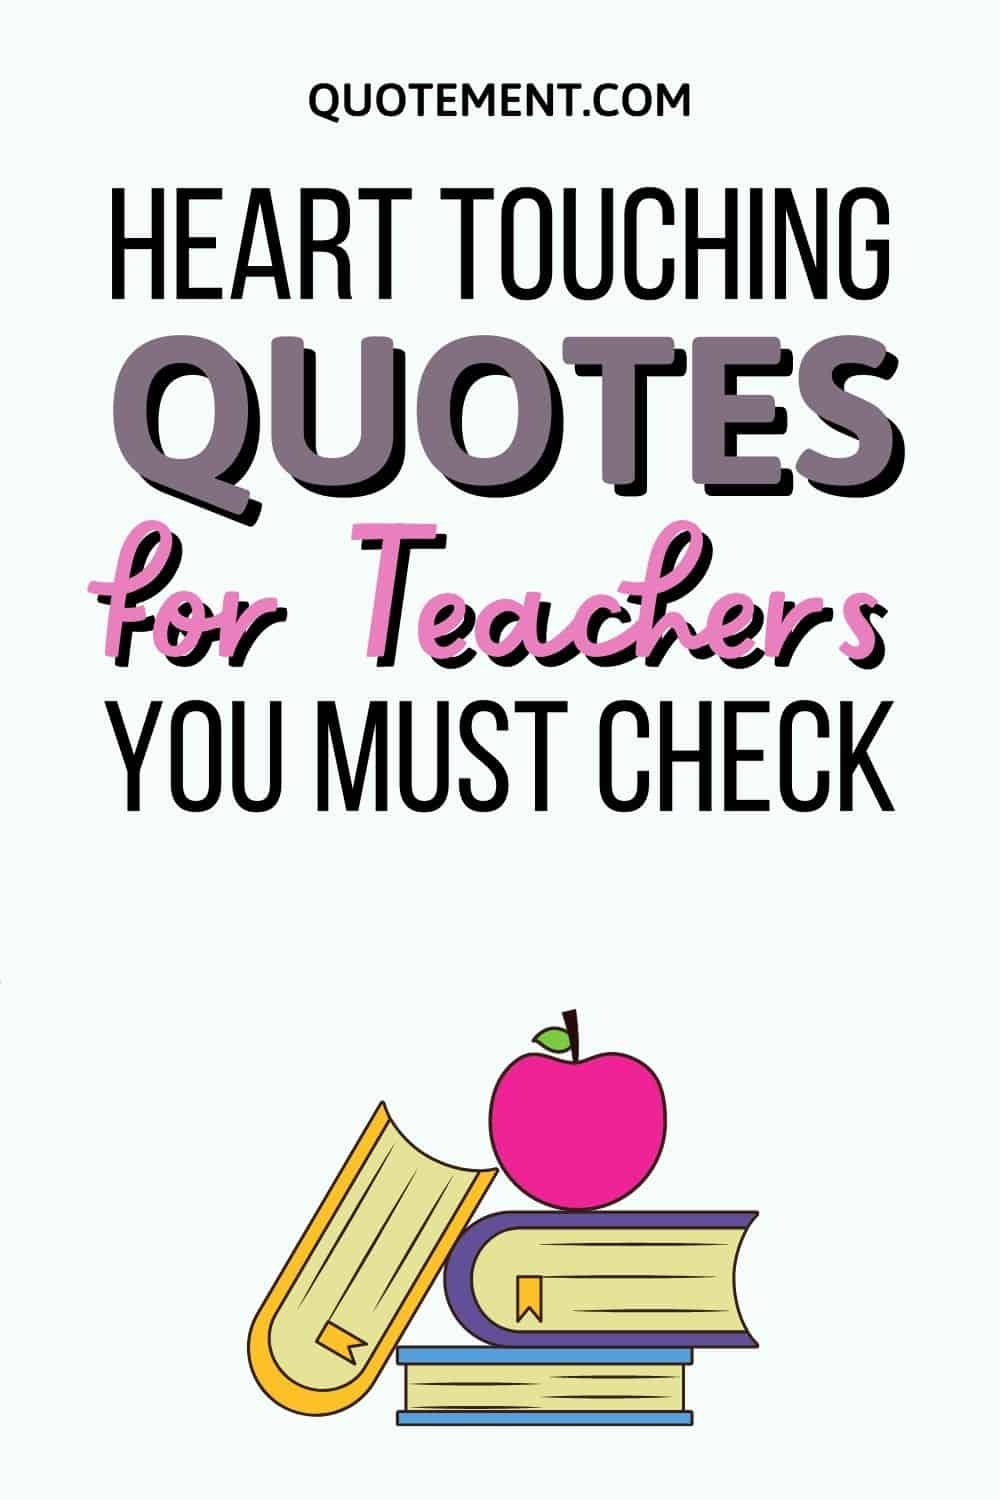 110 Heart Touching Quotes For Teachers To Celebrate Them